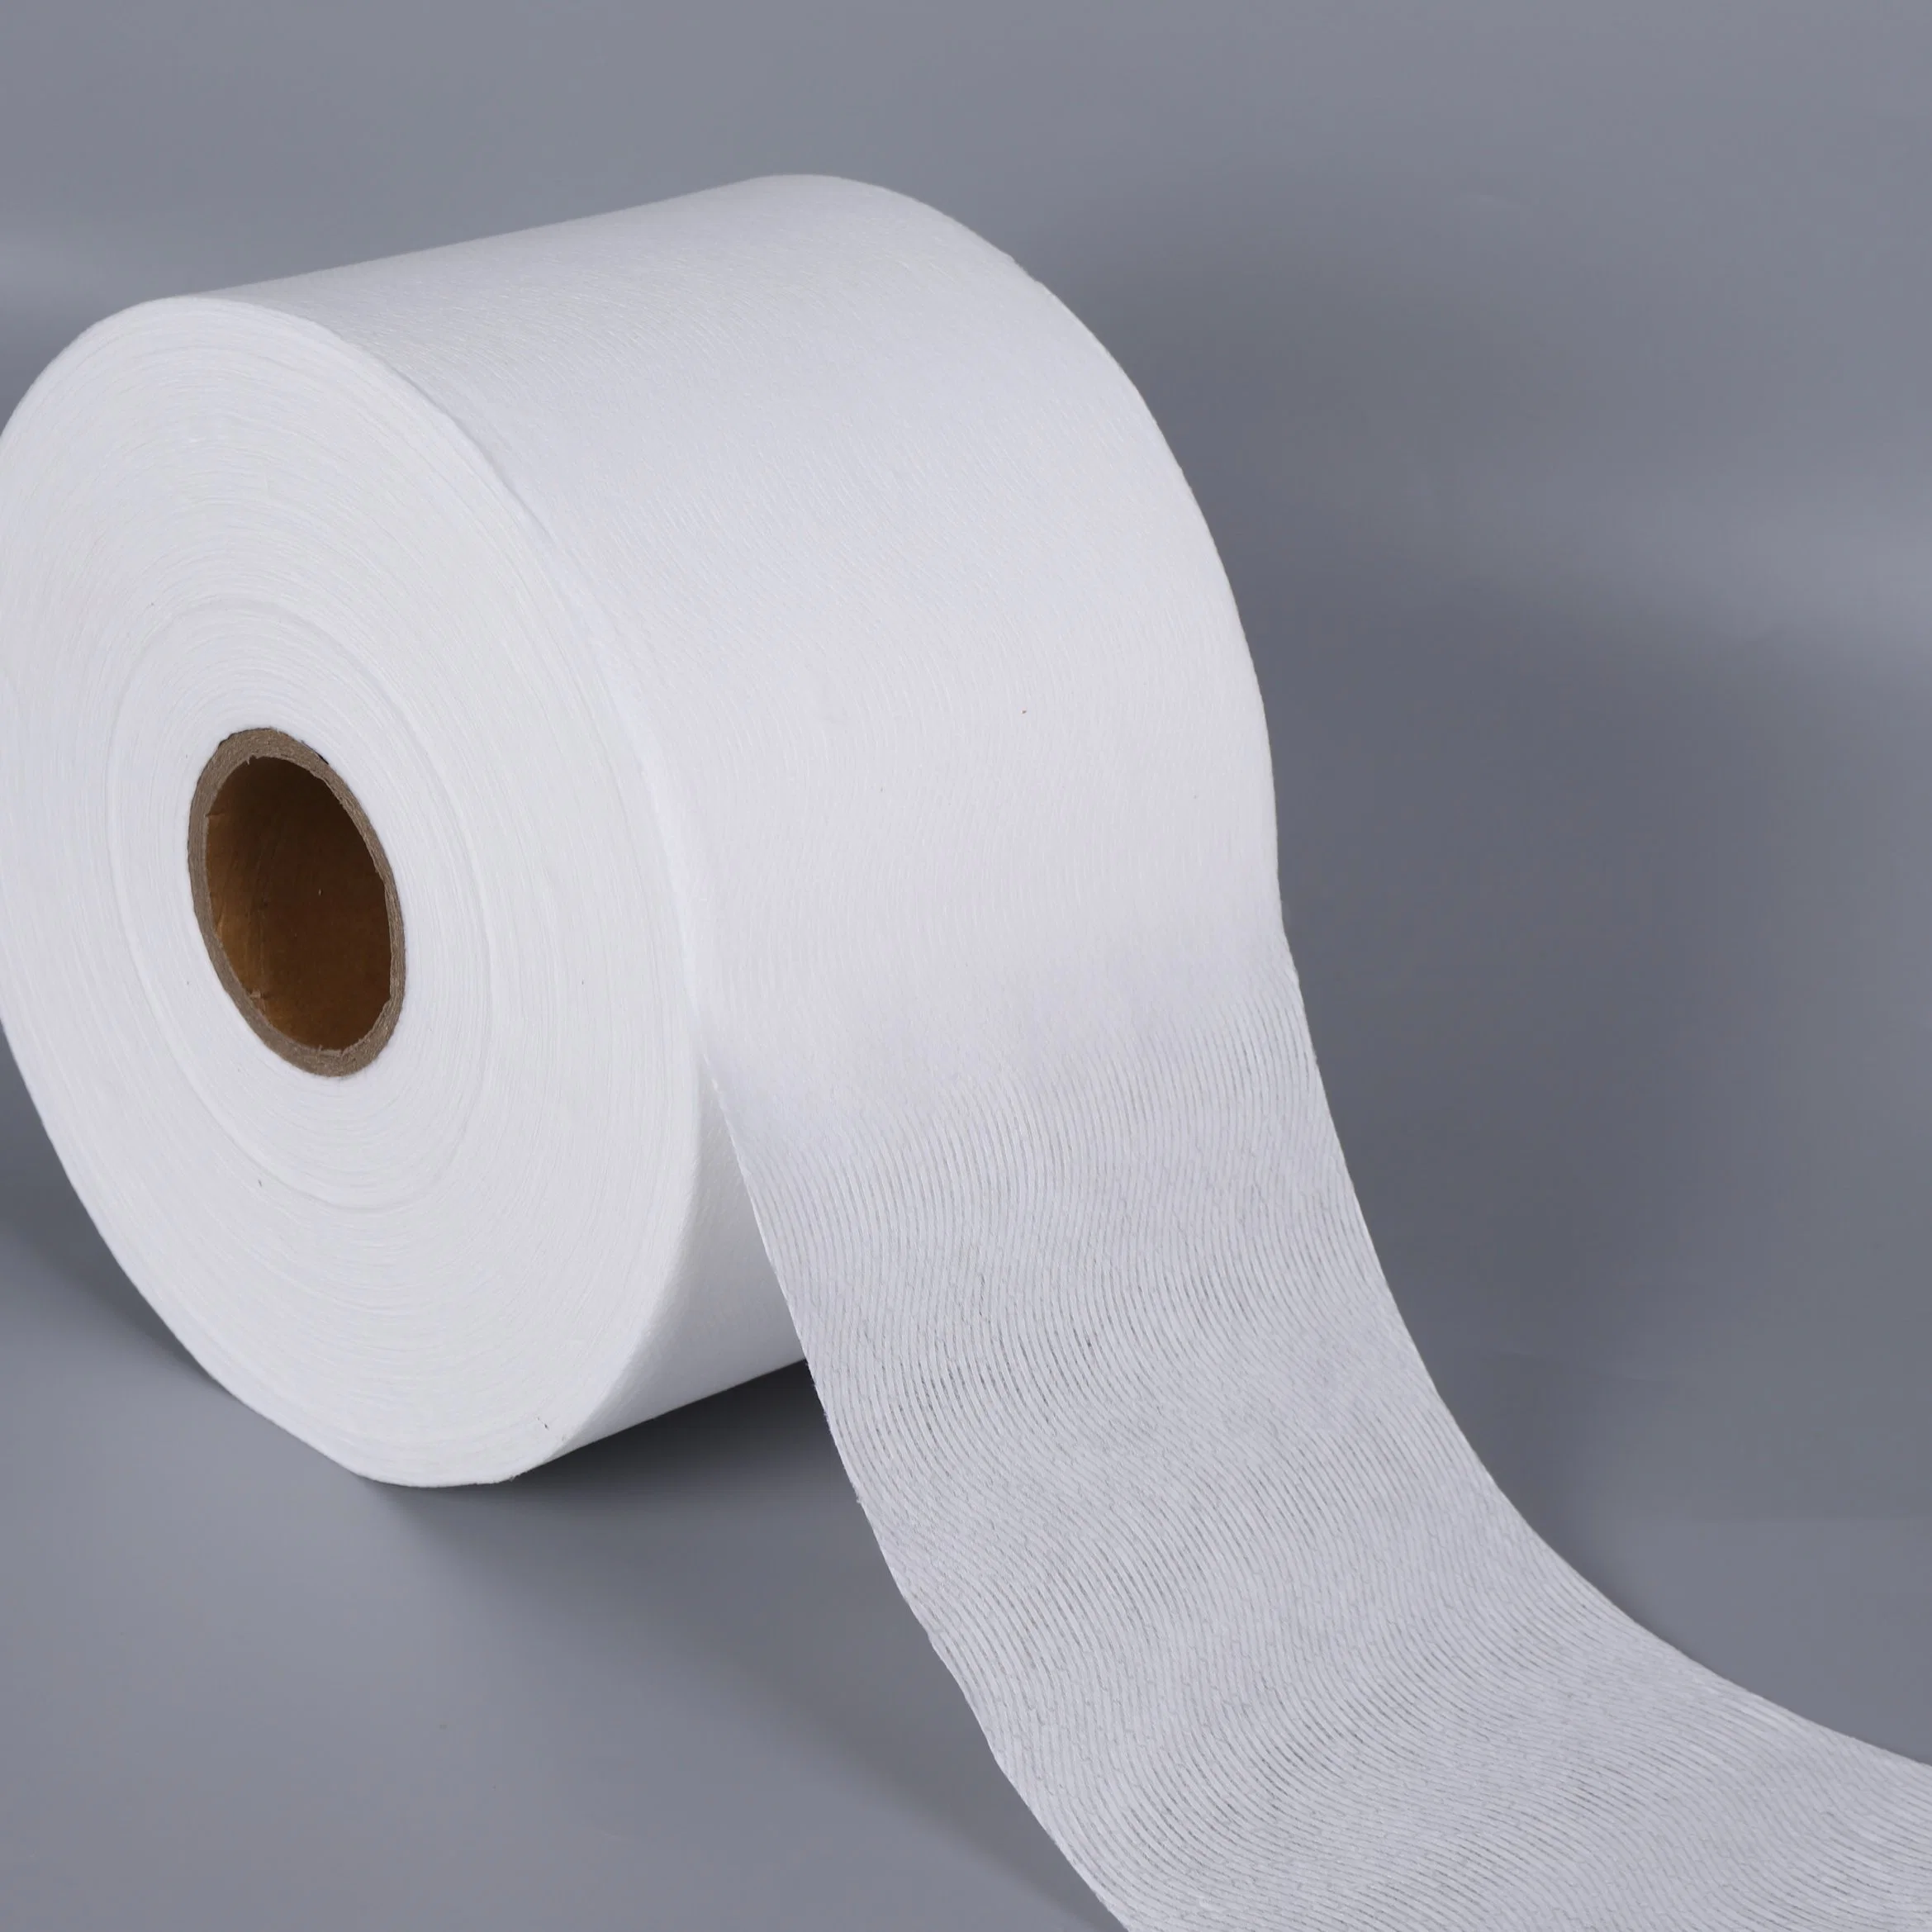 Spunlace Nonwoven Fabric Rolls 40GSM for Wet Wiping Cotton Fabric